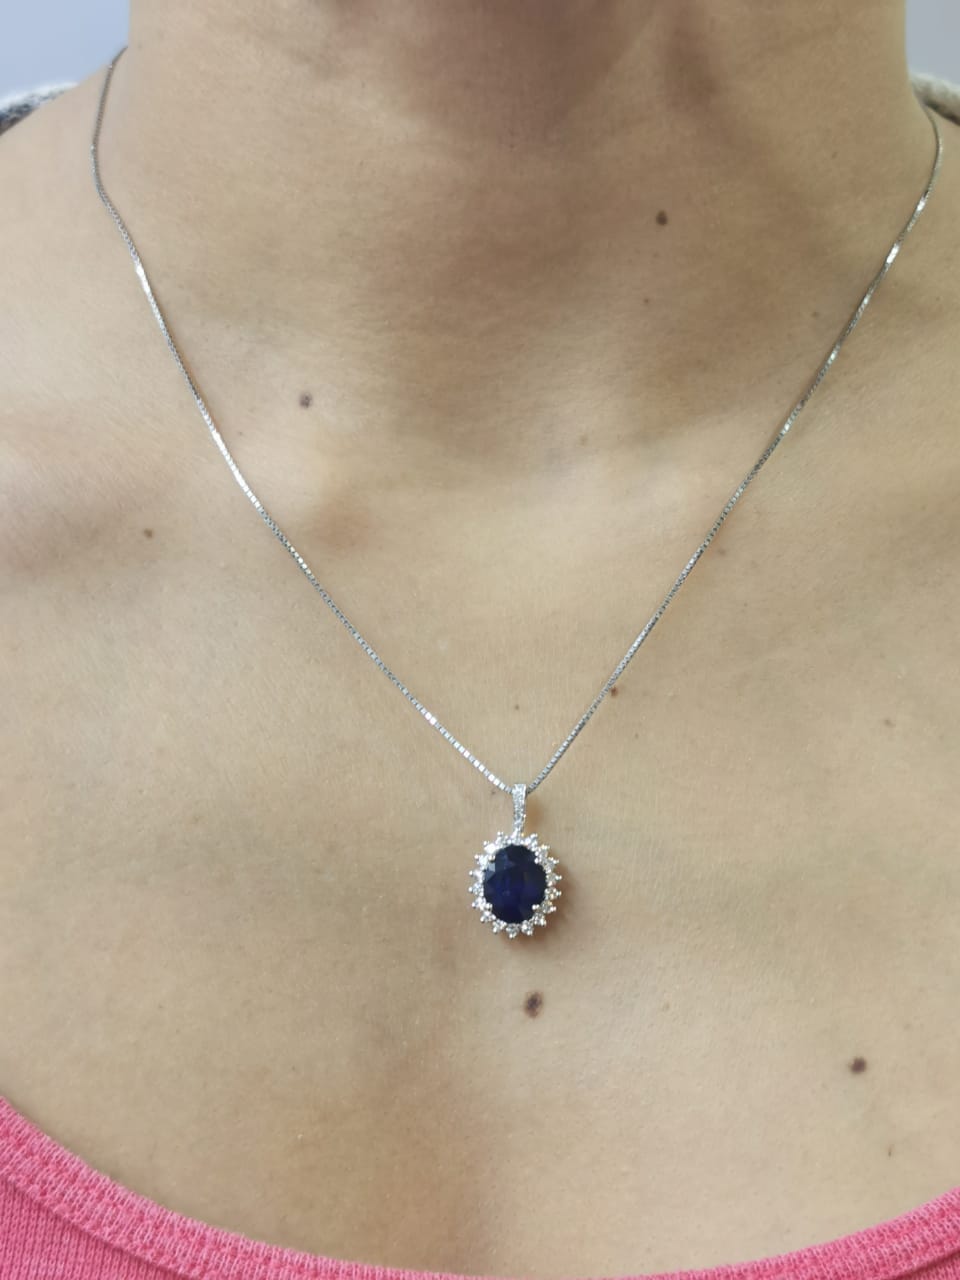 Oval Shape Sapphire Pendant Crafted In 18K White Gold